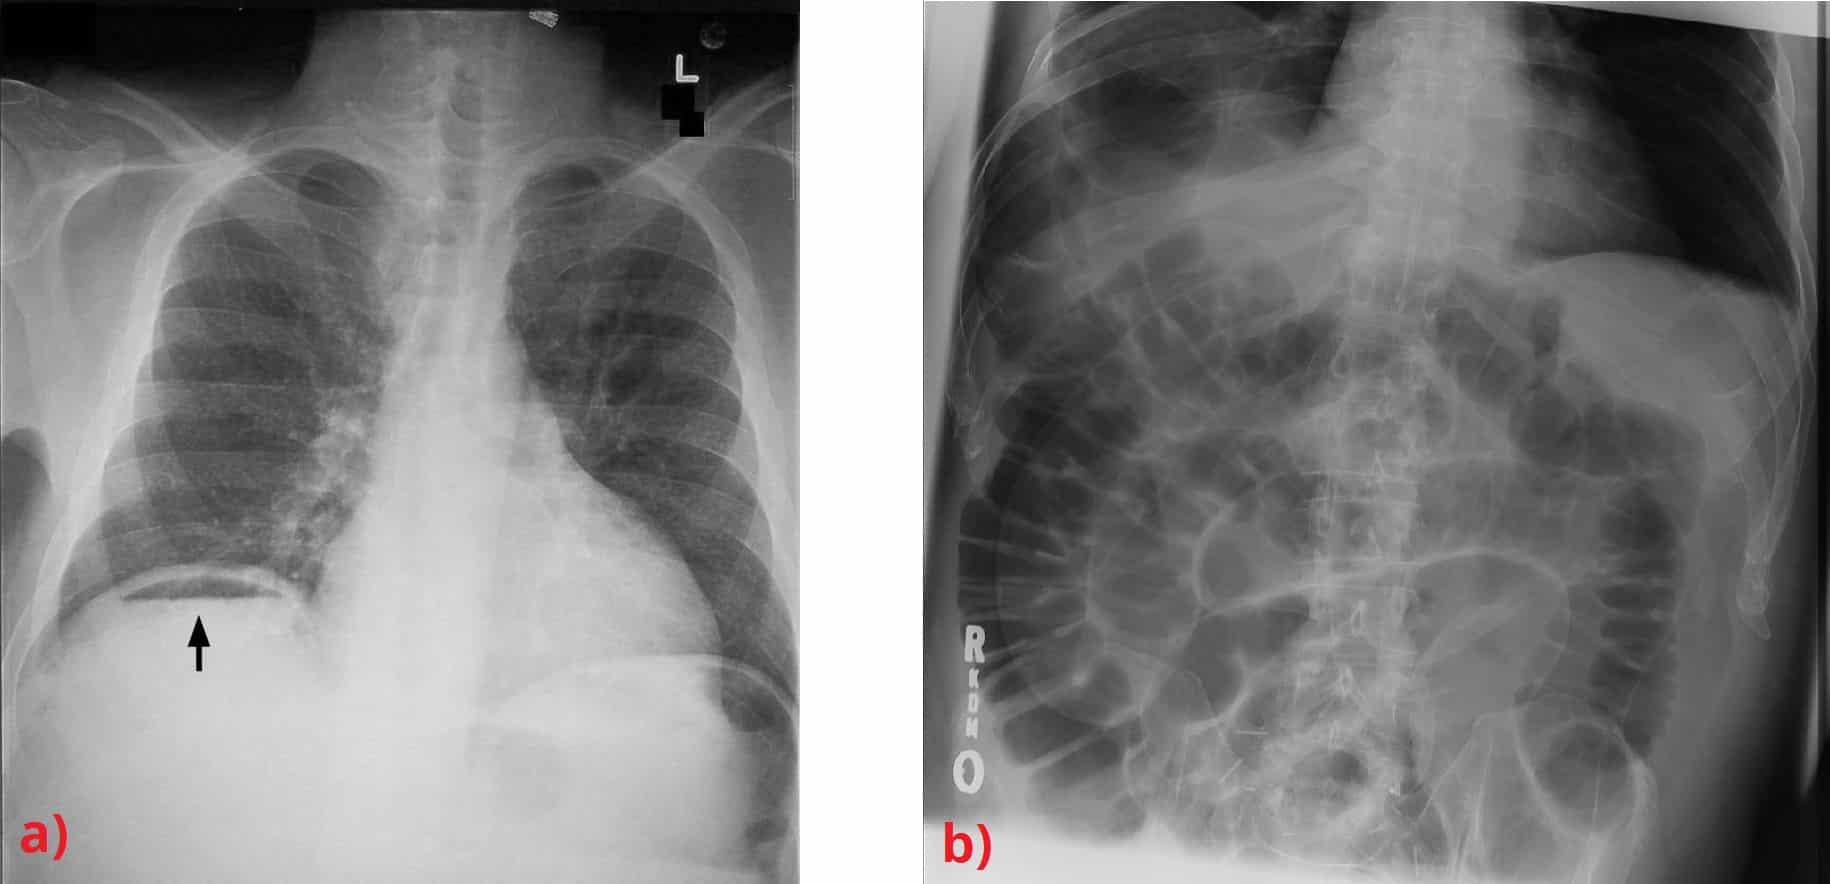 Fig 3 - Radiographic evidence of pnuemoperitoneum. a) Free air under the diaphragm; and b) Rigler's sign.